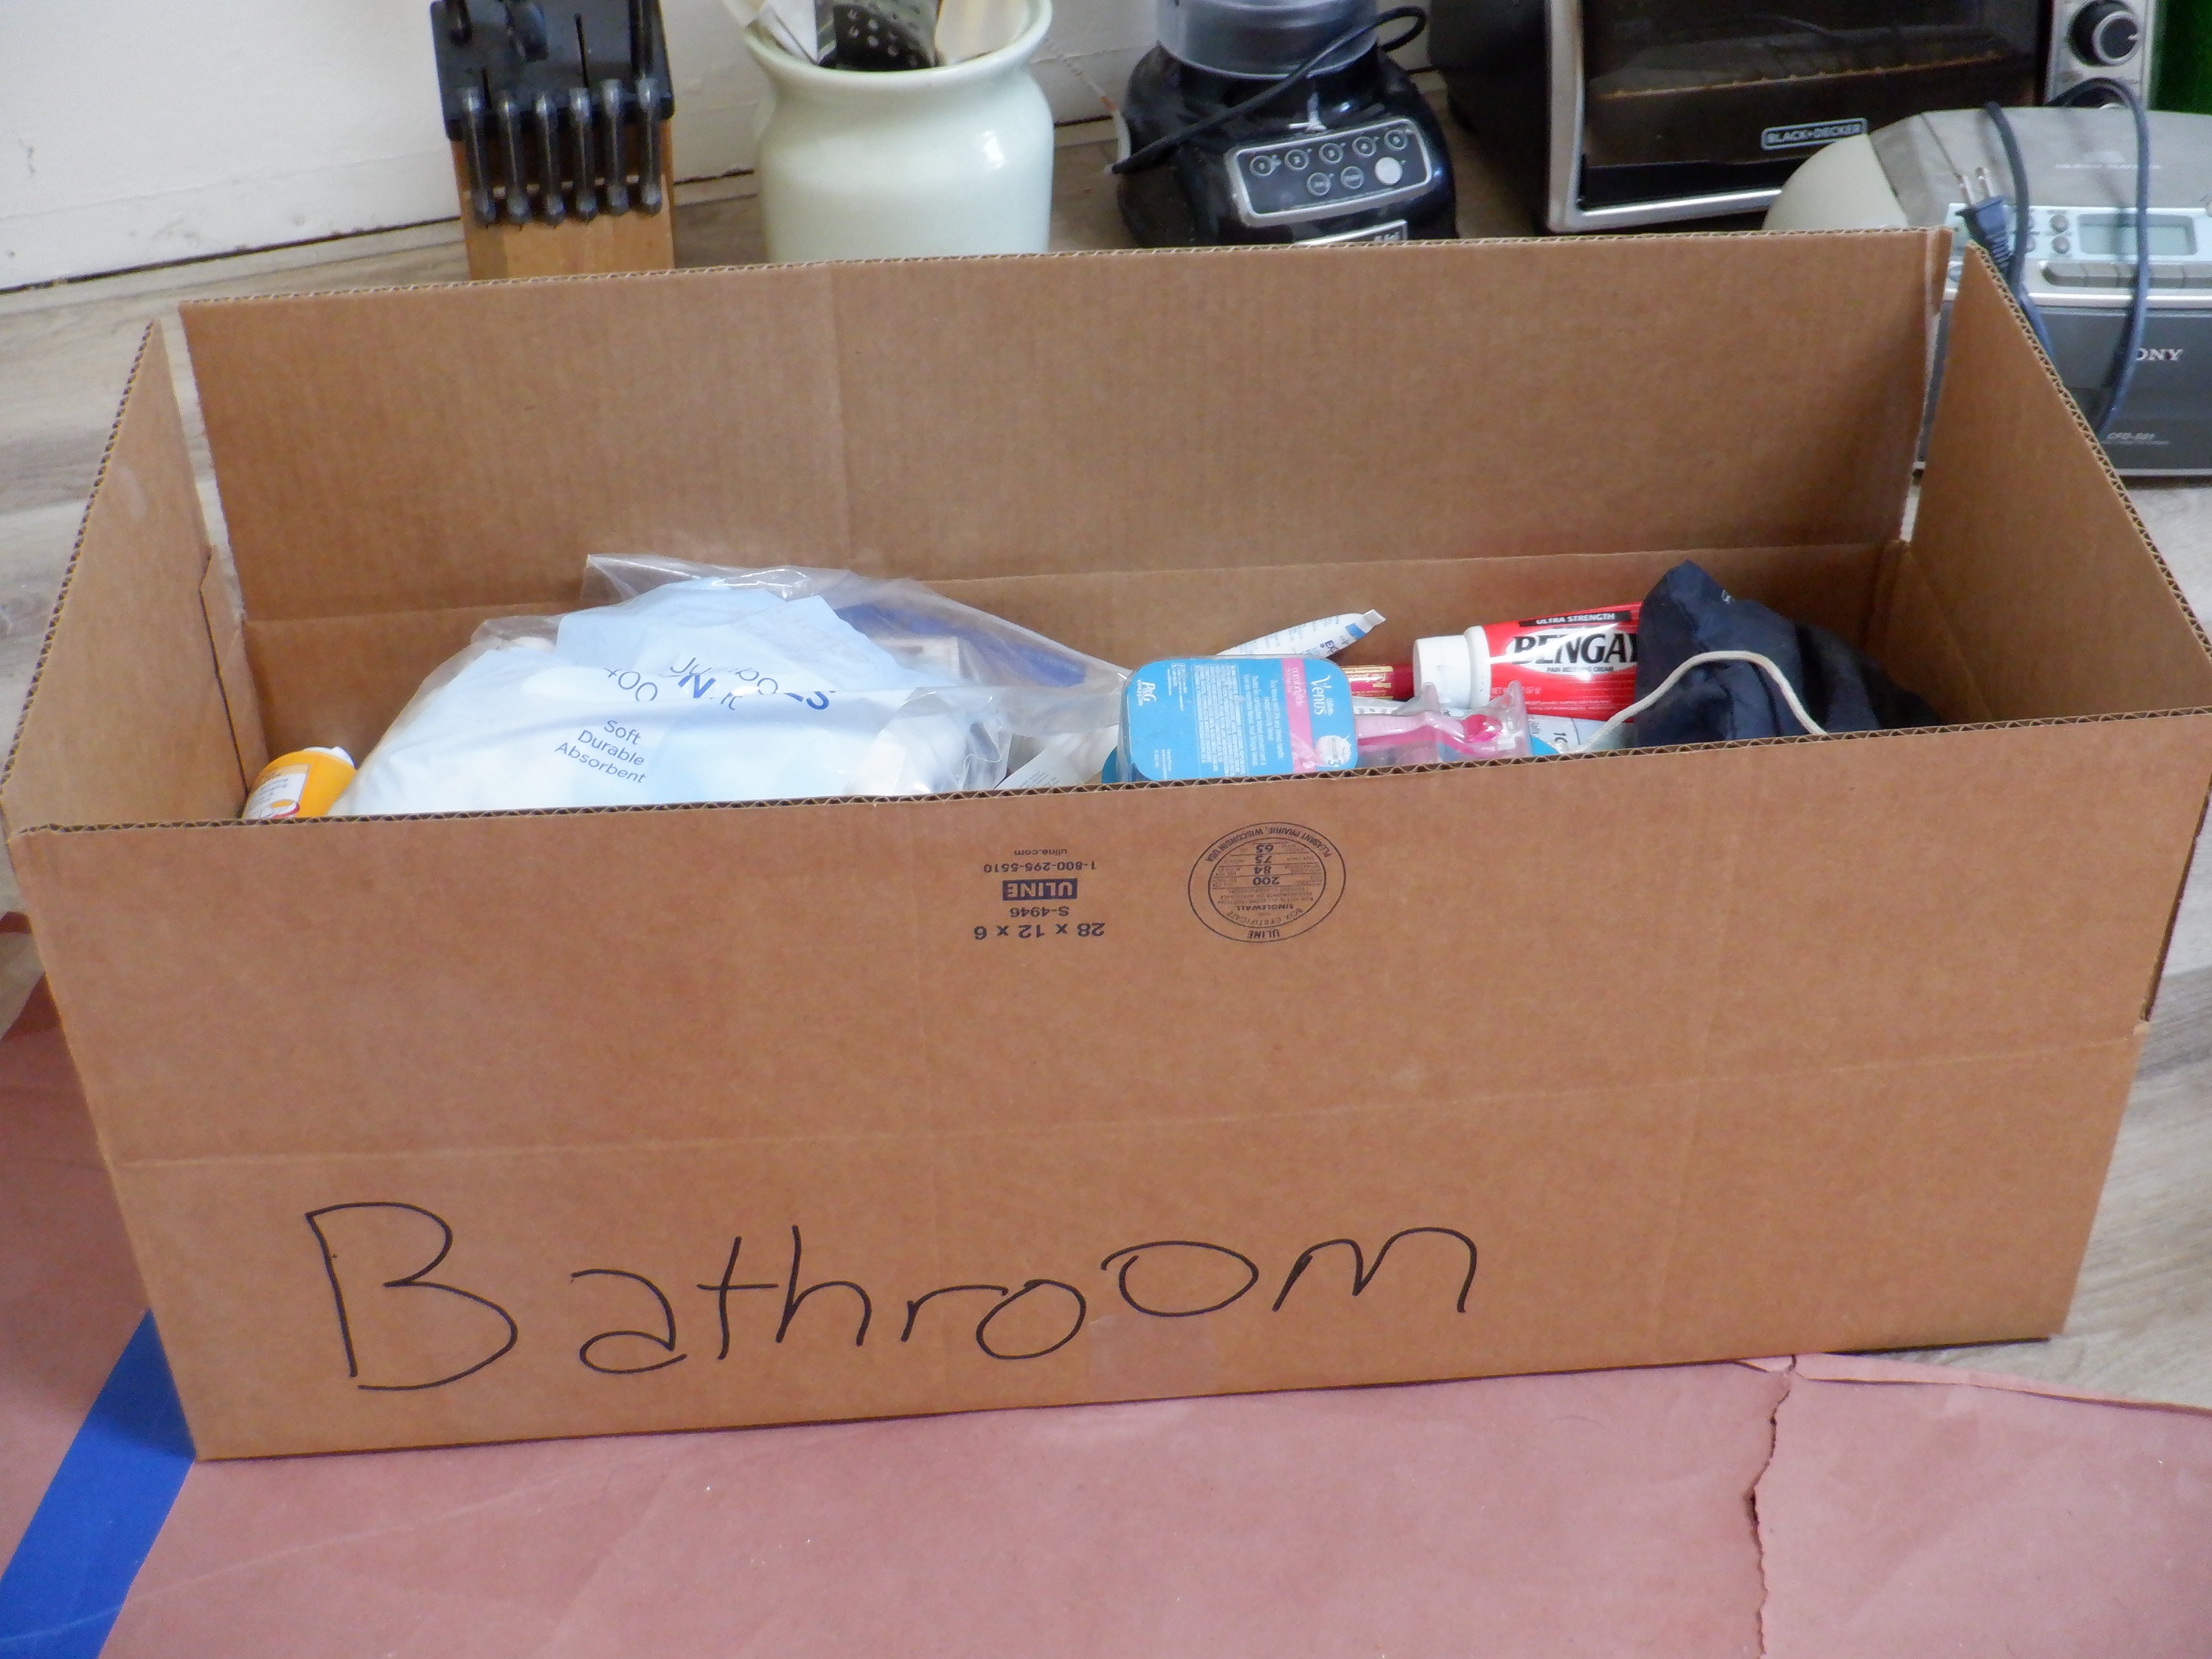 Photo I took of the first box I put stuff from my bathroom in